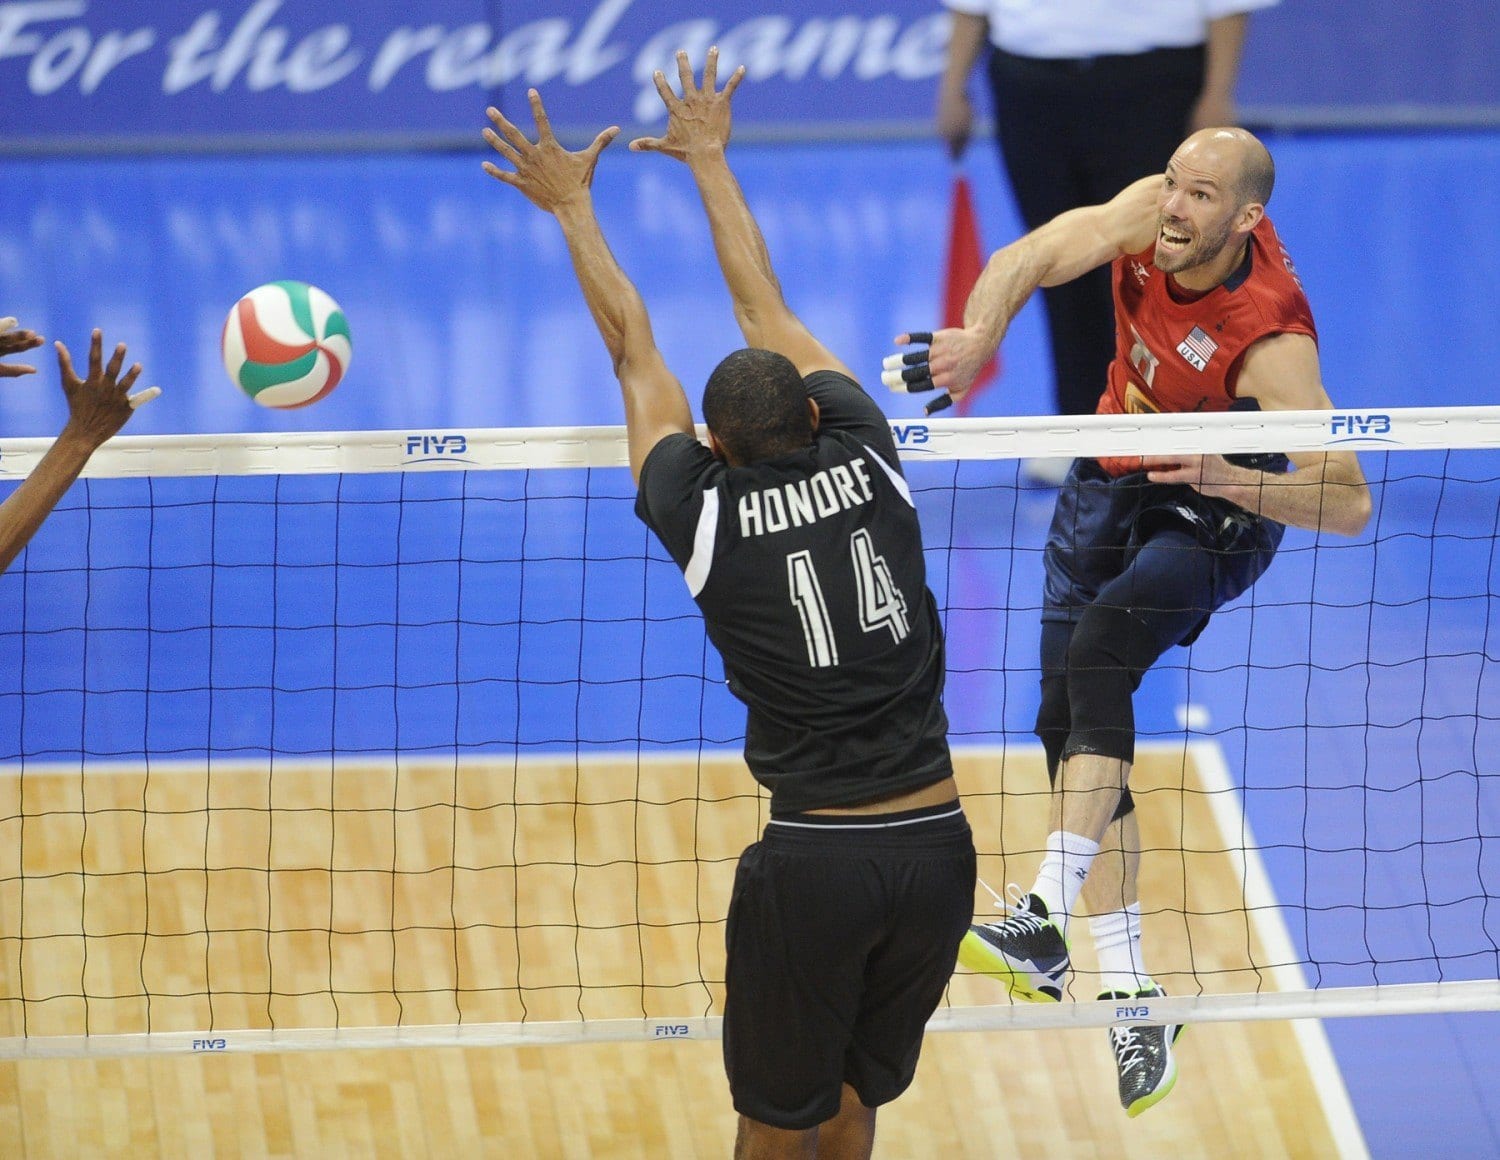 God has used 'ups & downs' of volleyball, U.S. captain says - Sports ...